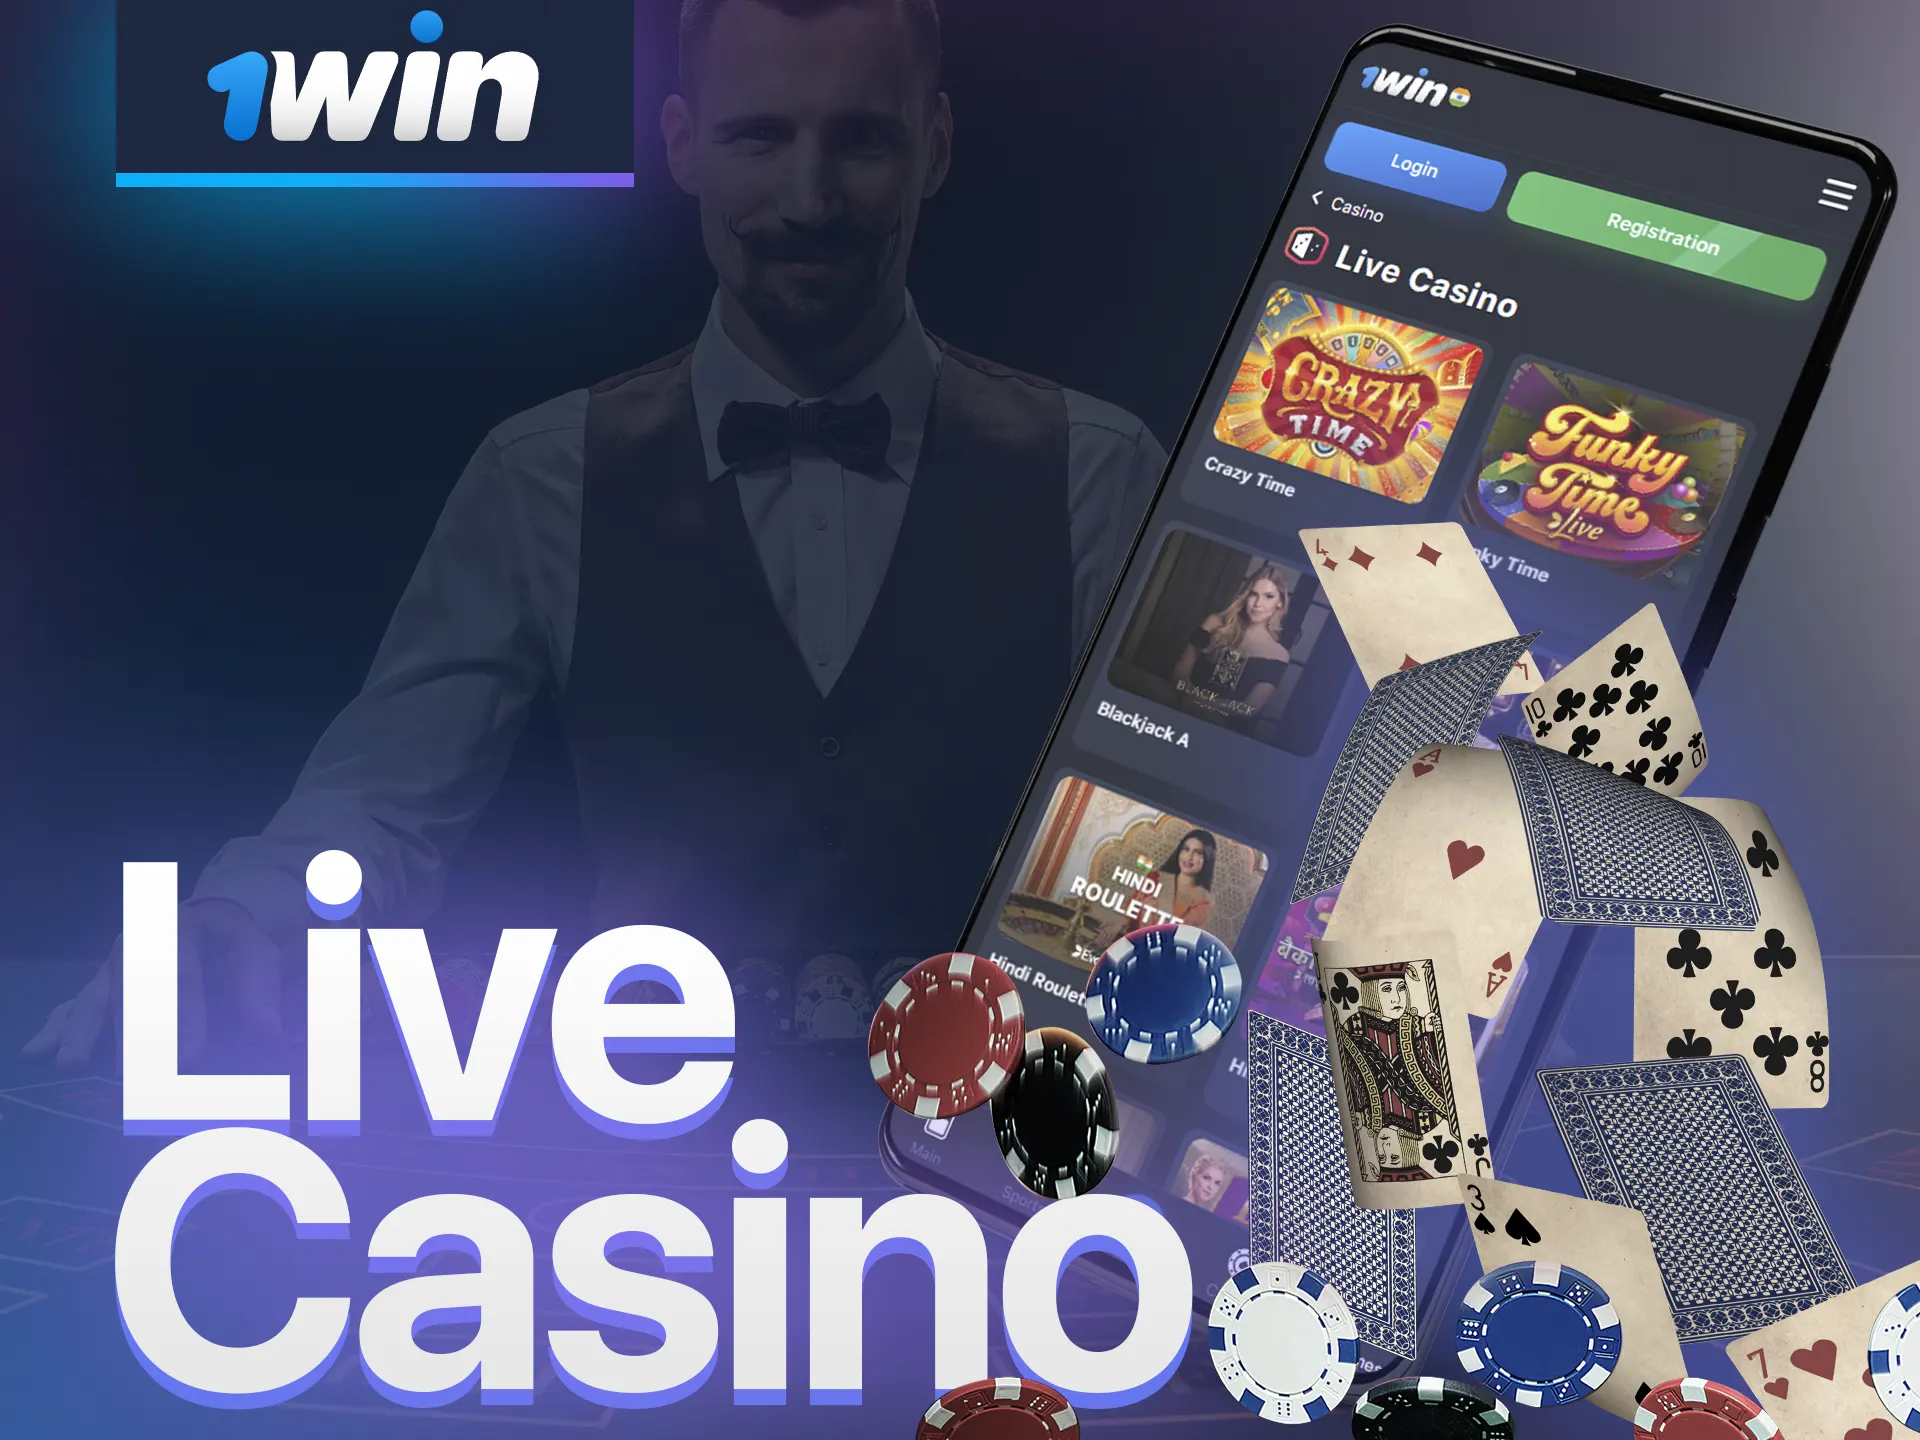 With the Live Casino feature, 1win replicates the atmosphere of a real casino.